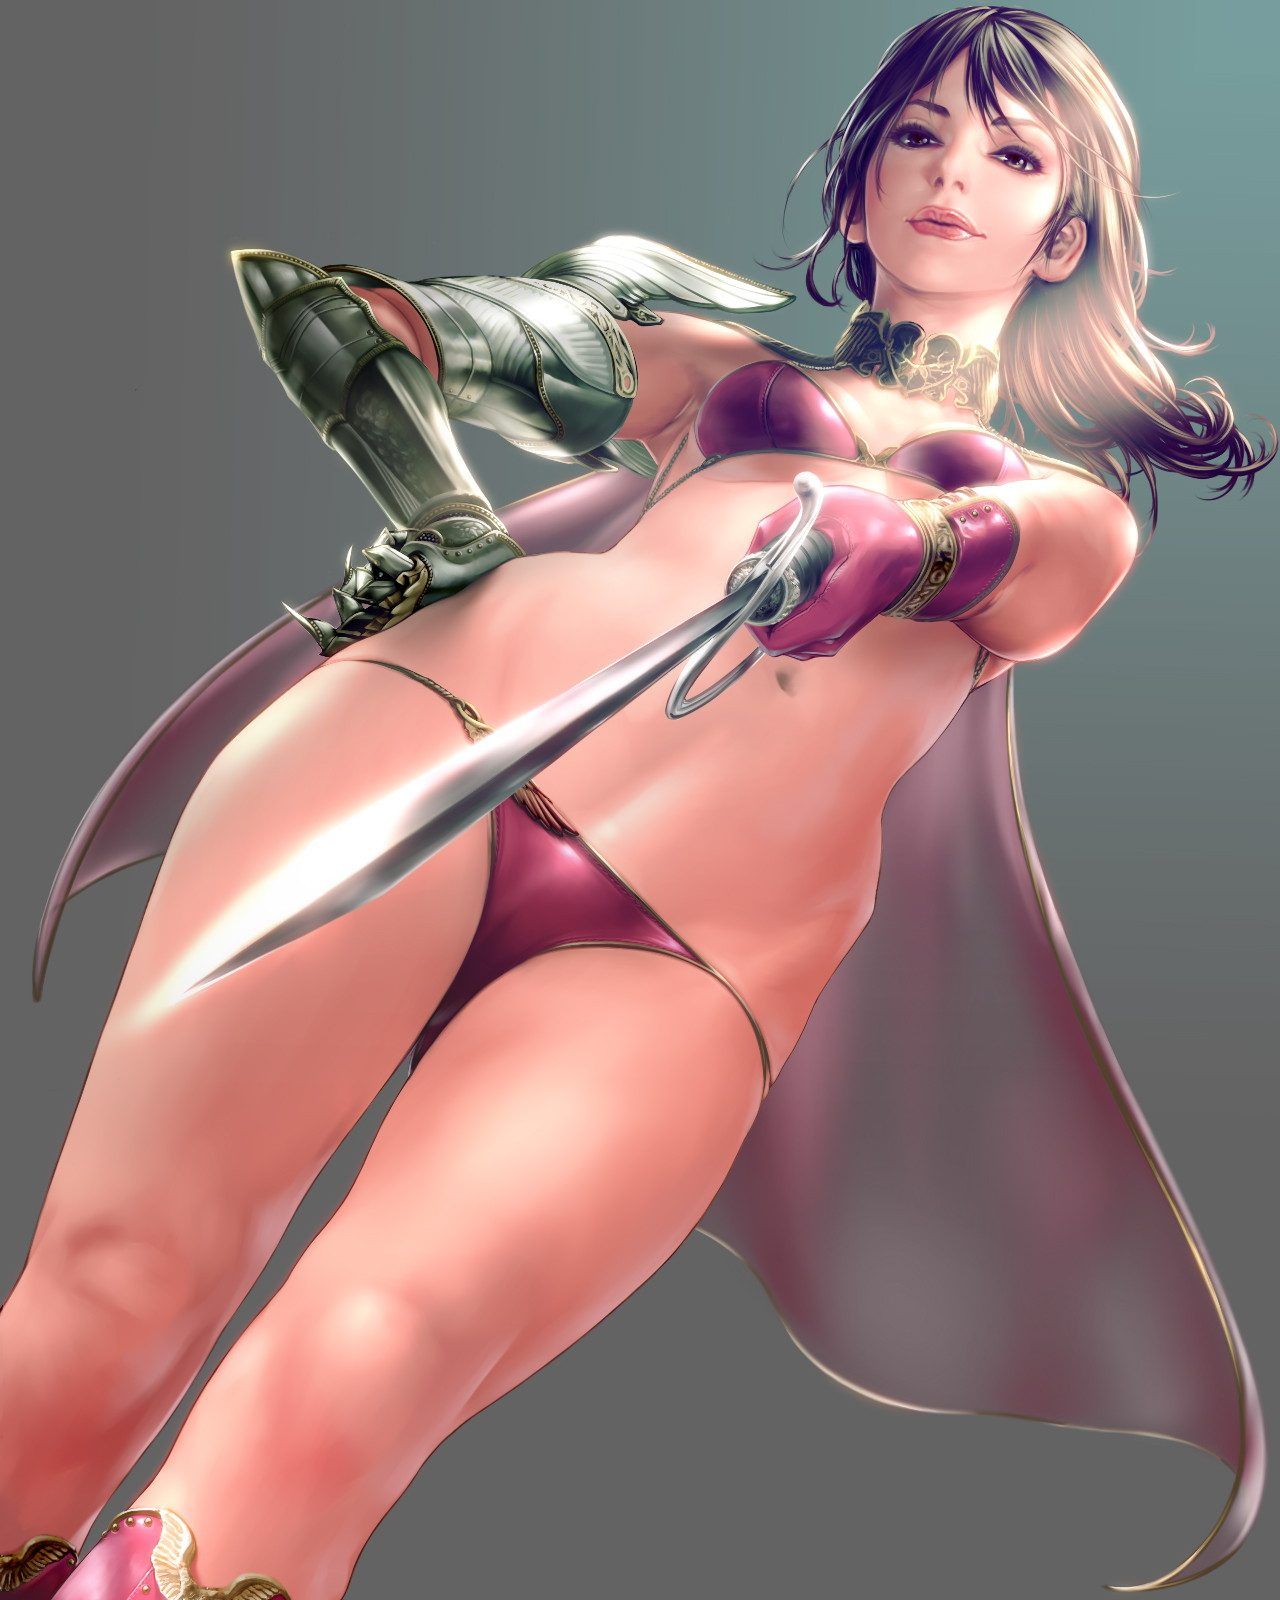 Woman Warrior secondary erotic images Please oh. 7